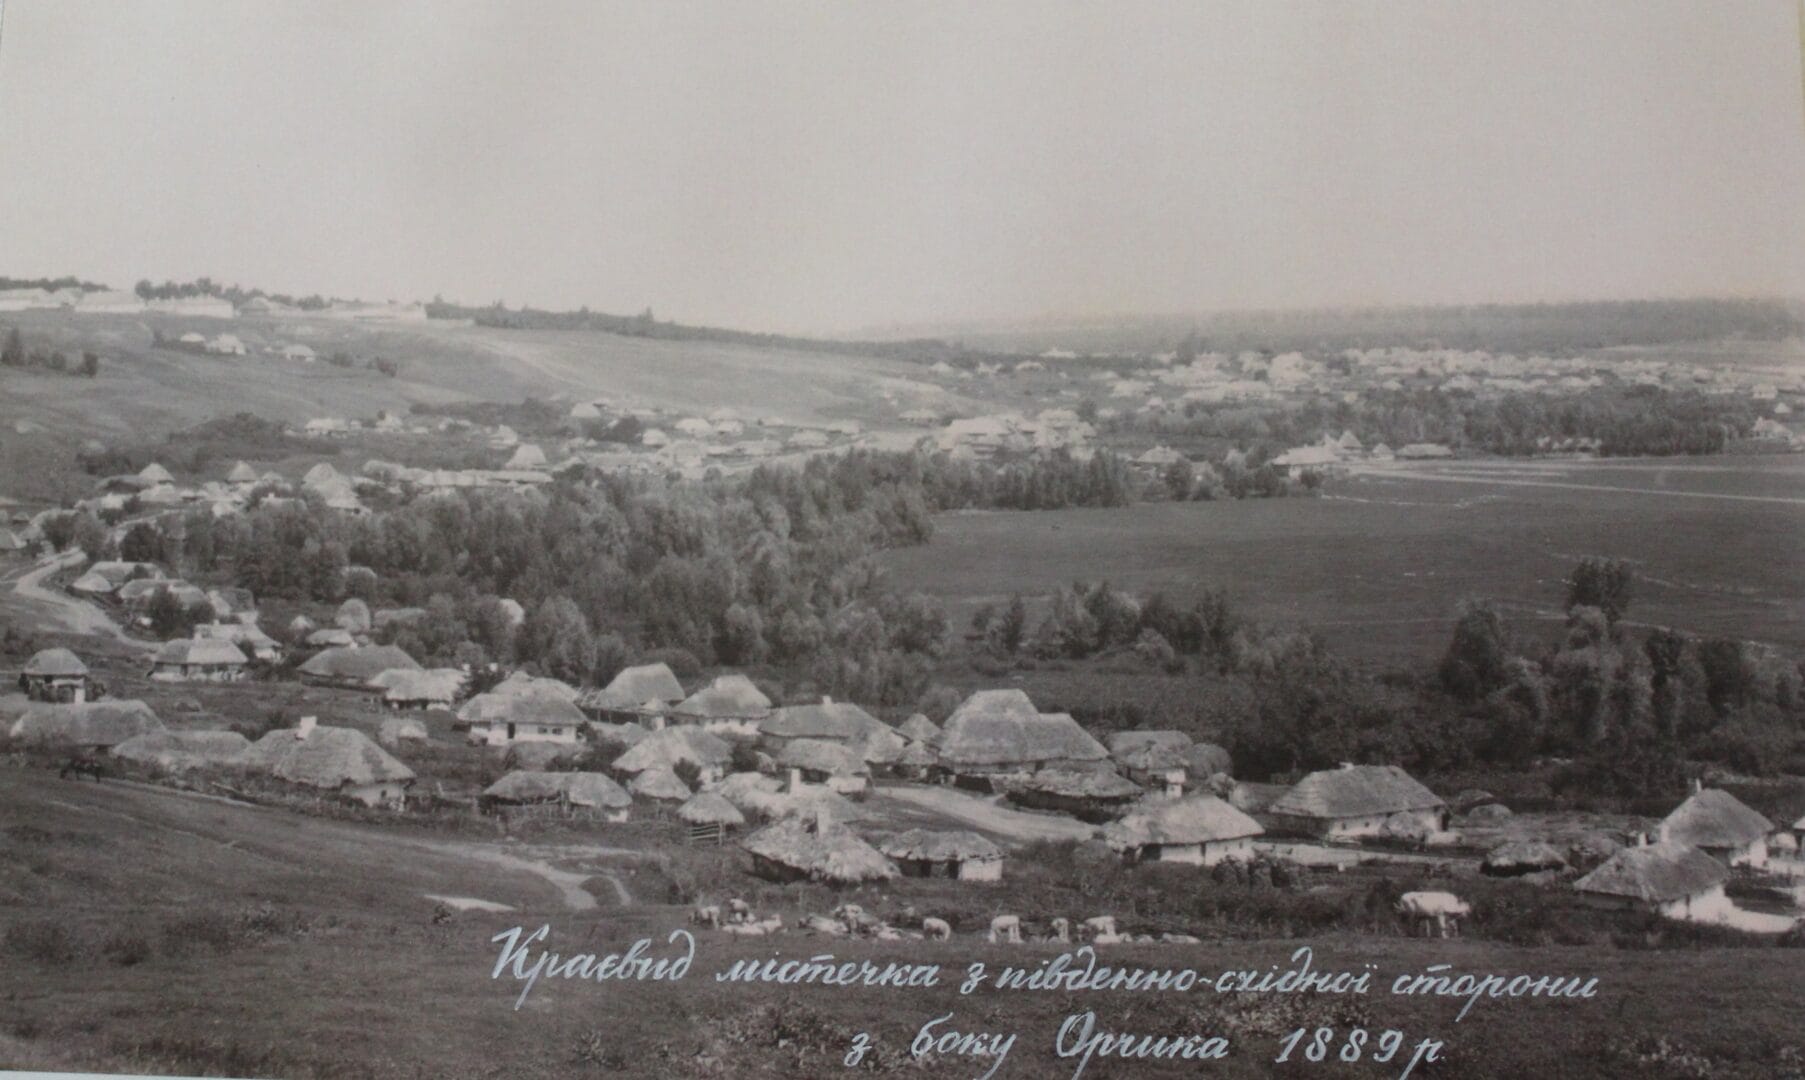 A panorama of the town of Karlivka in 1889